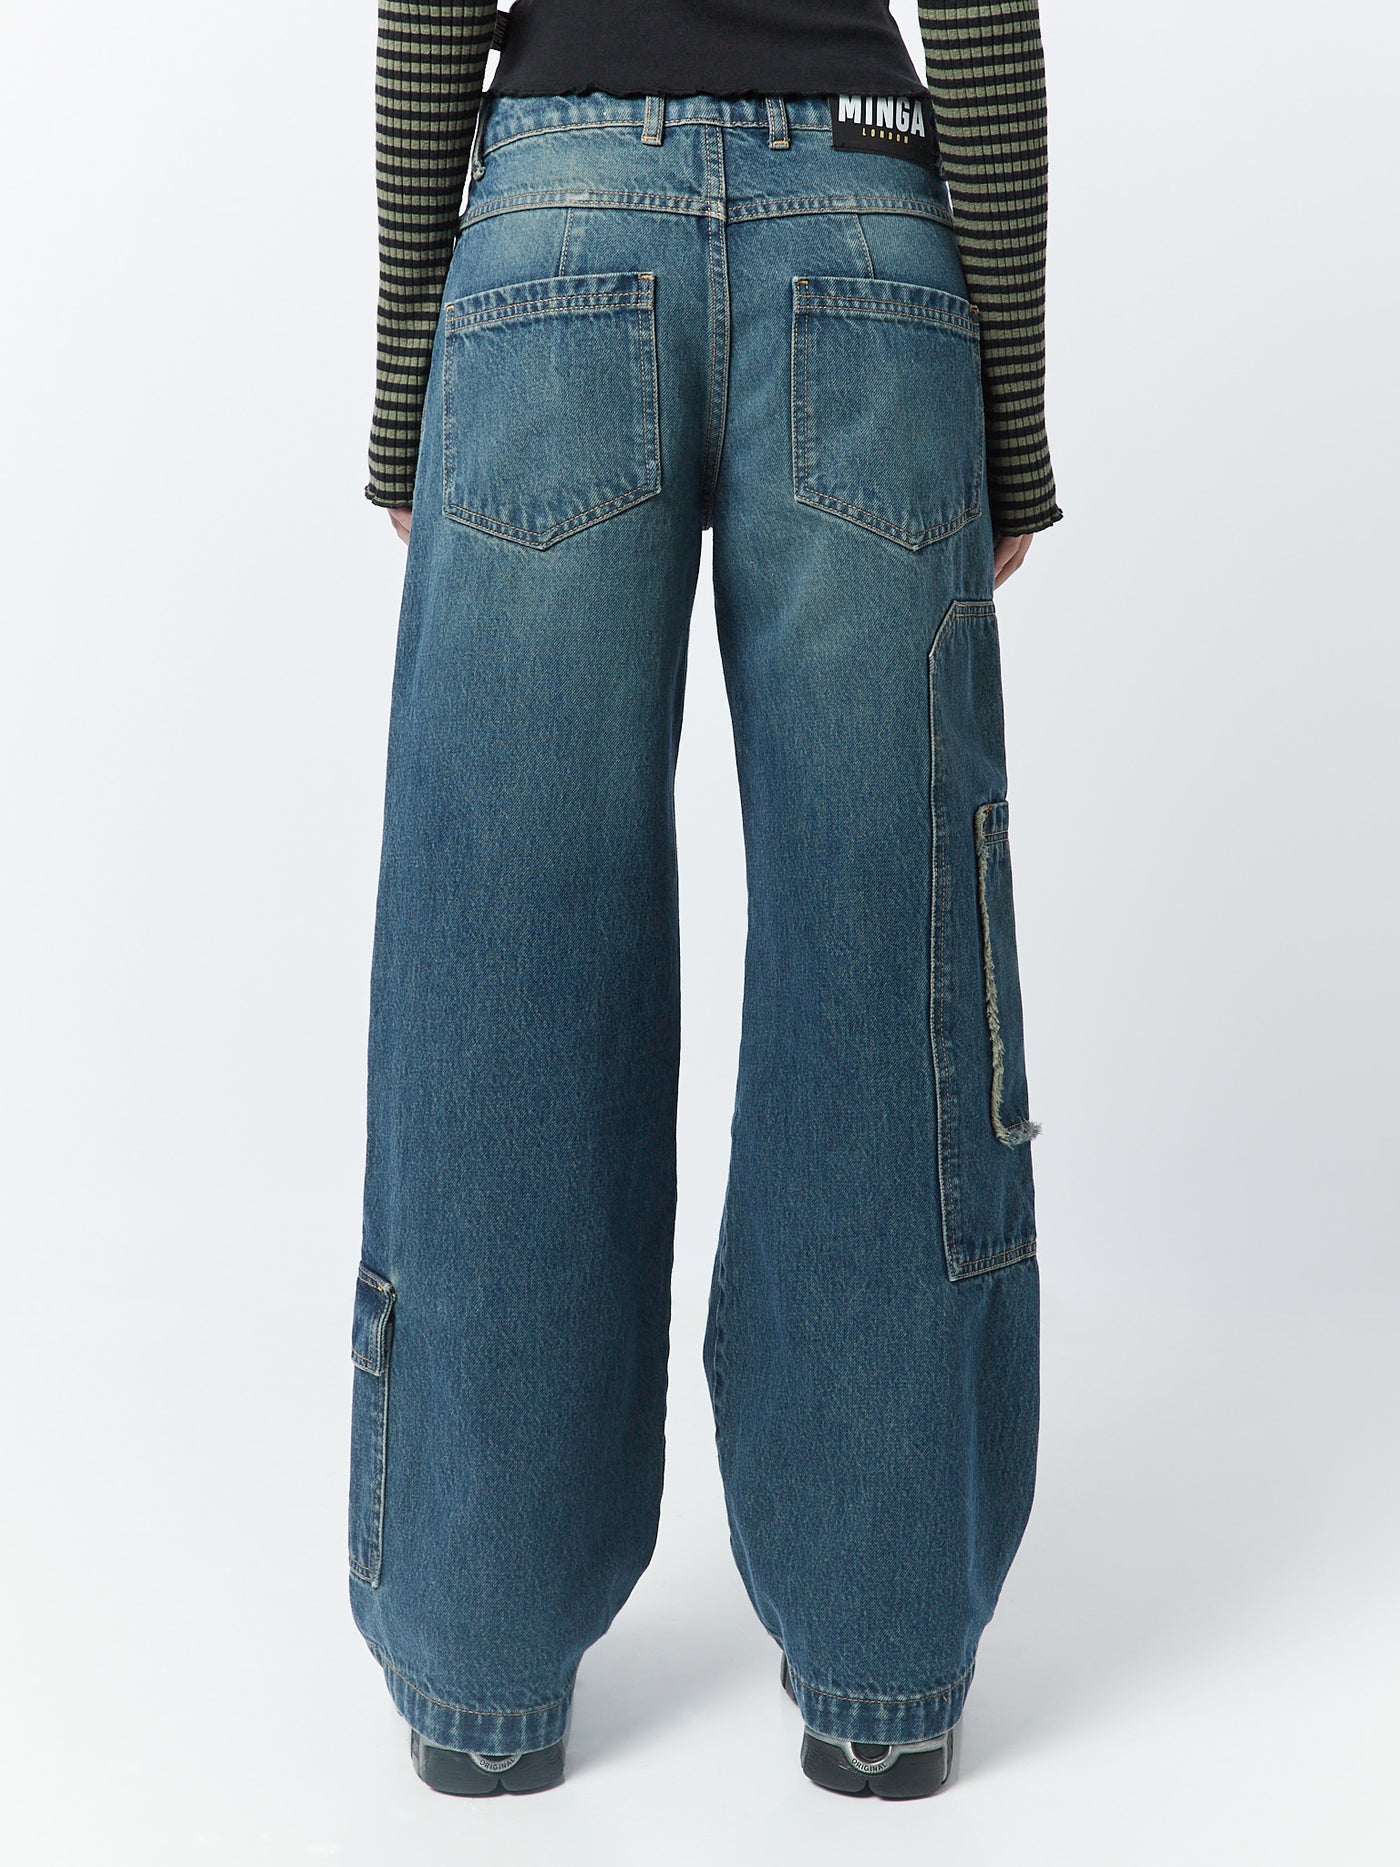 Blue overdye cargo jeans named Track by Minga London. These jeans feature multiple pockets, combining style and functionality for a trendy and versatile look.